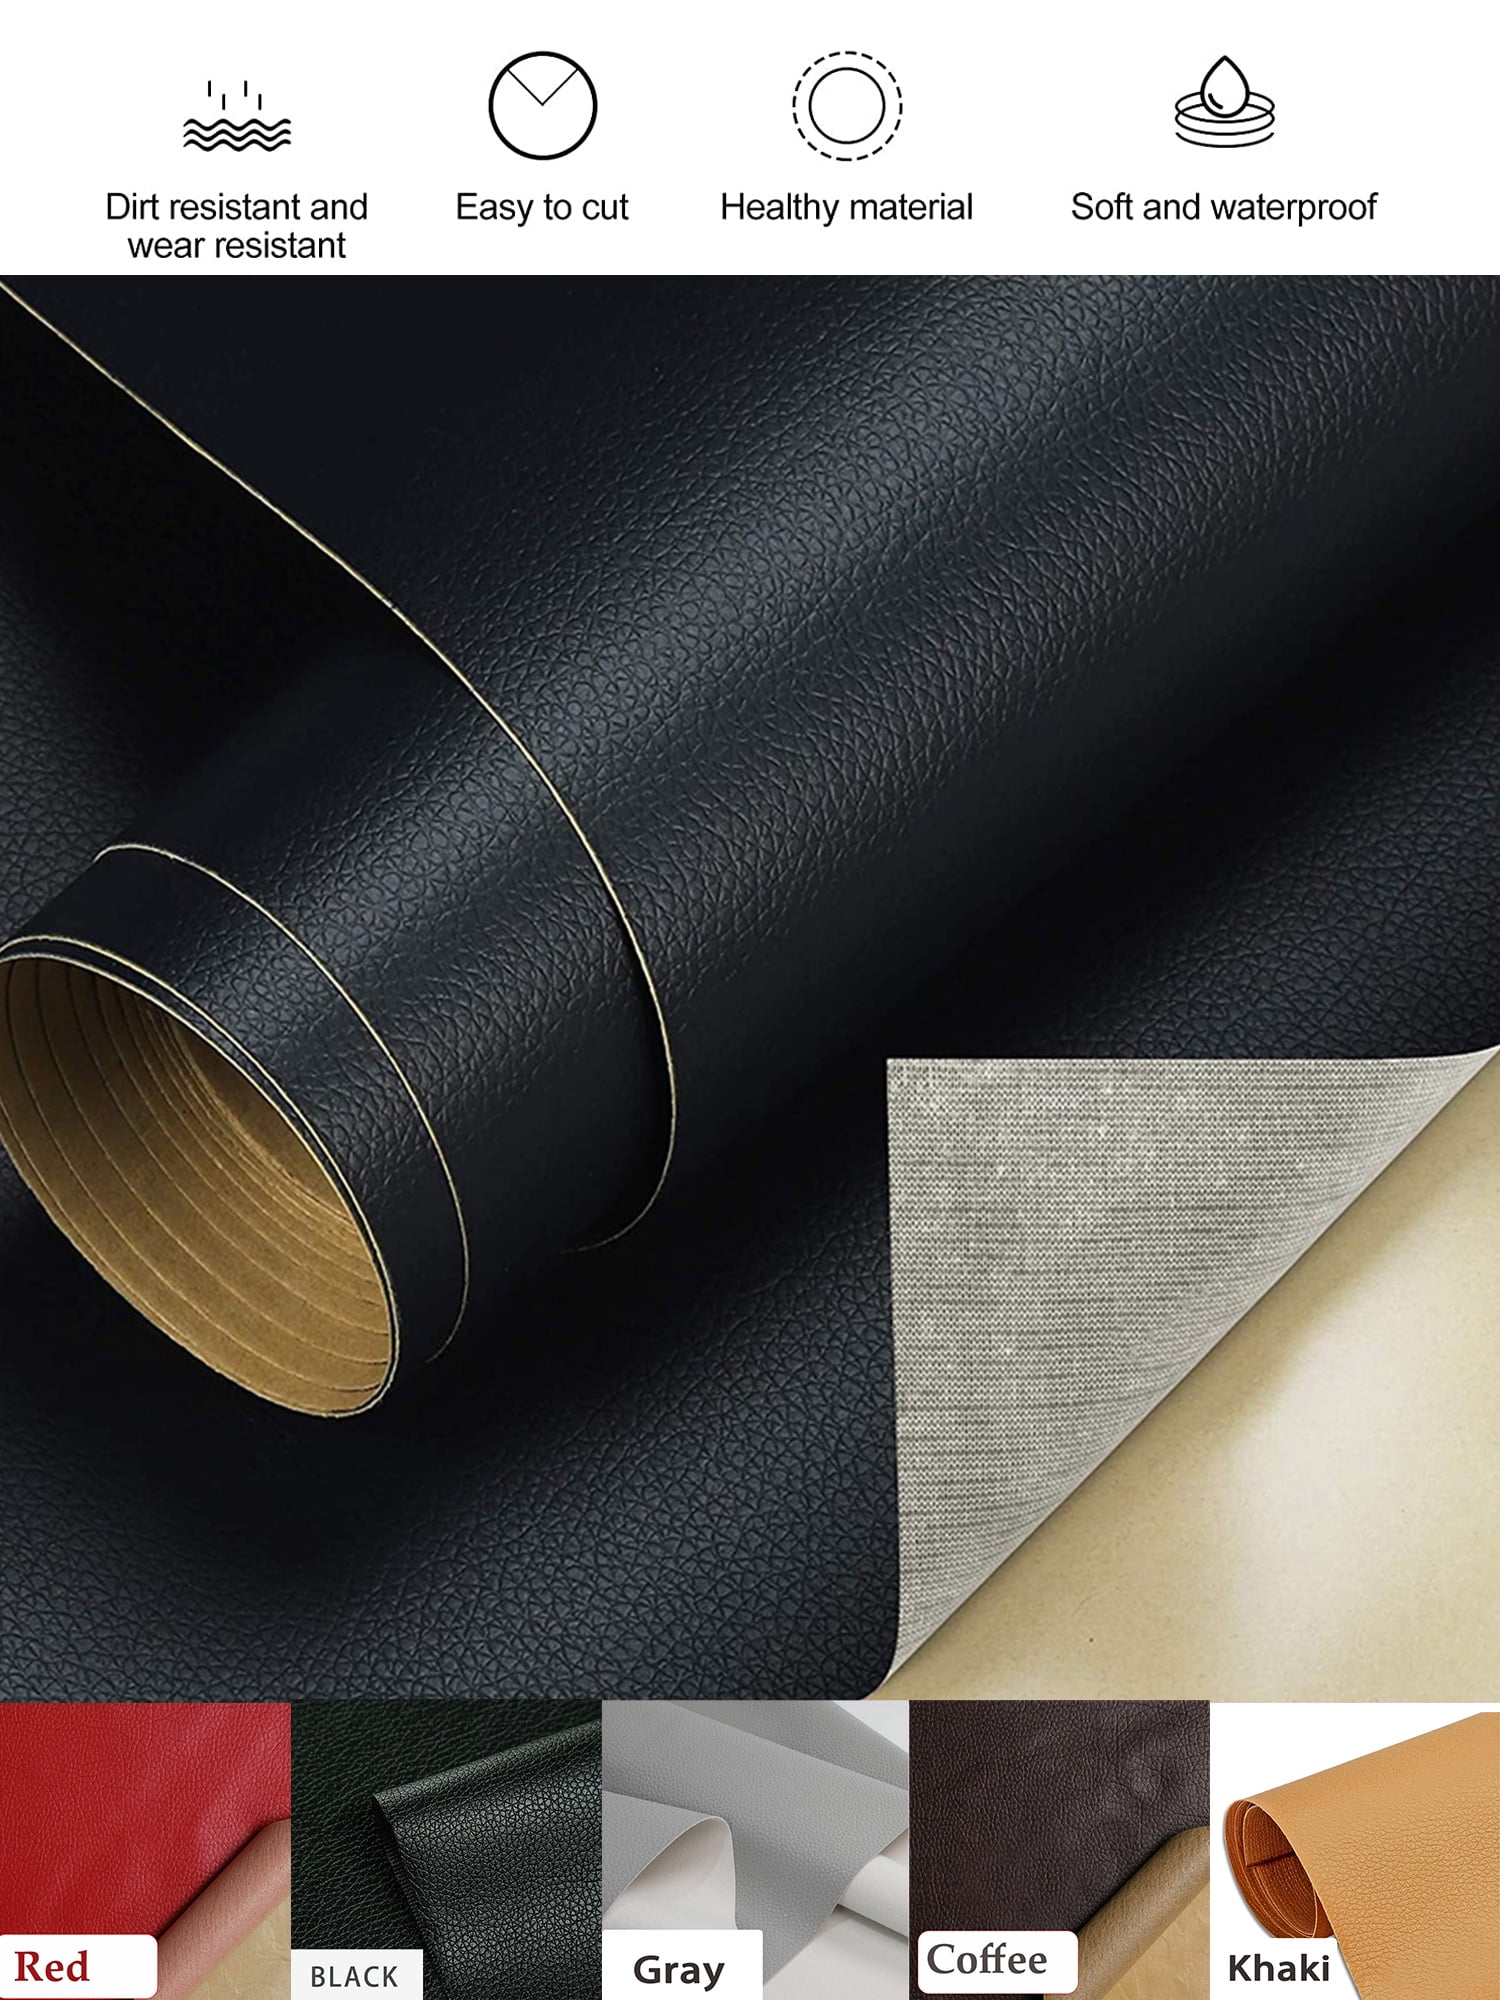 Length: 5 m; Width : 5 -10 -15 - 20 cm, Leather Repair Tape Patch Leather  Self-Adhesive Repair, First Aid Patch No Heat Required